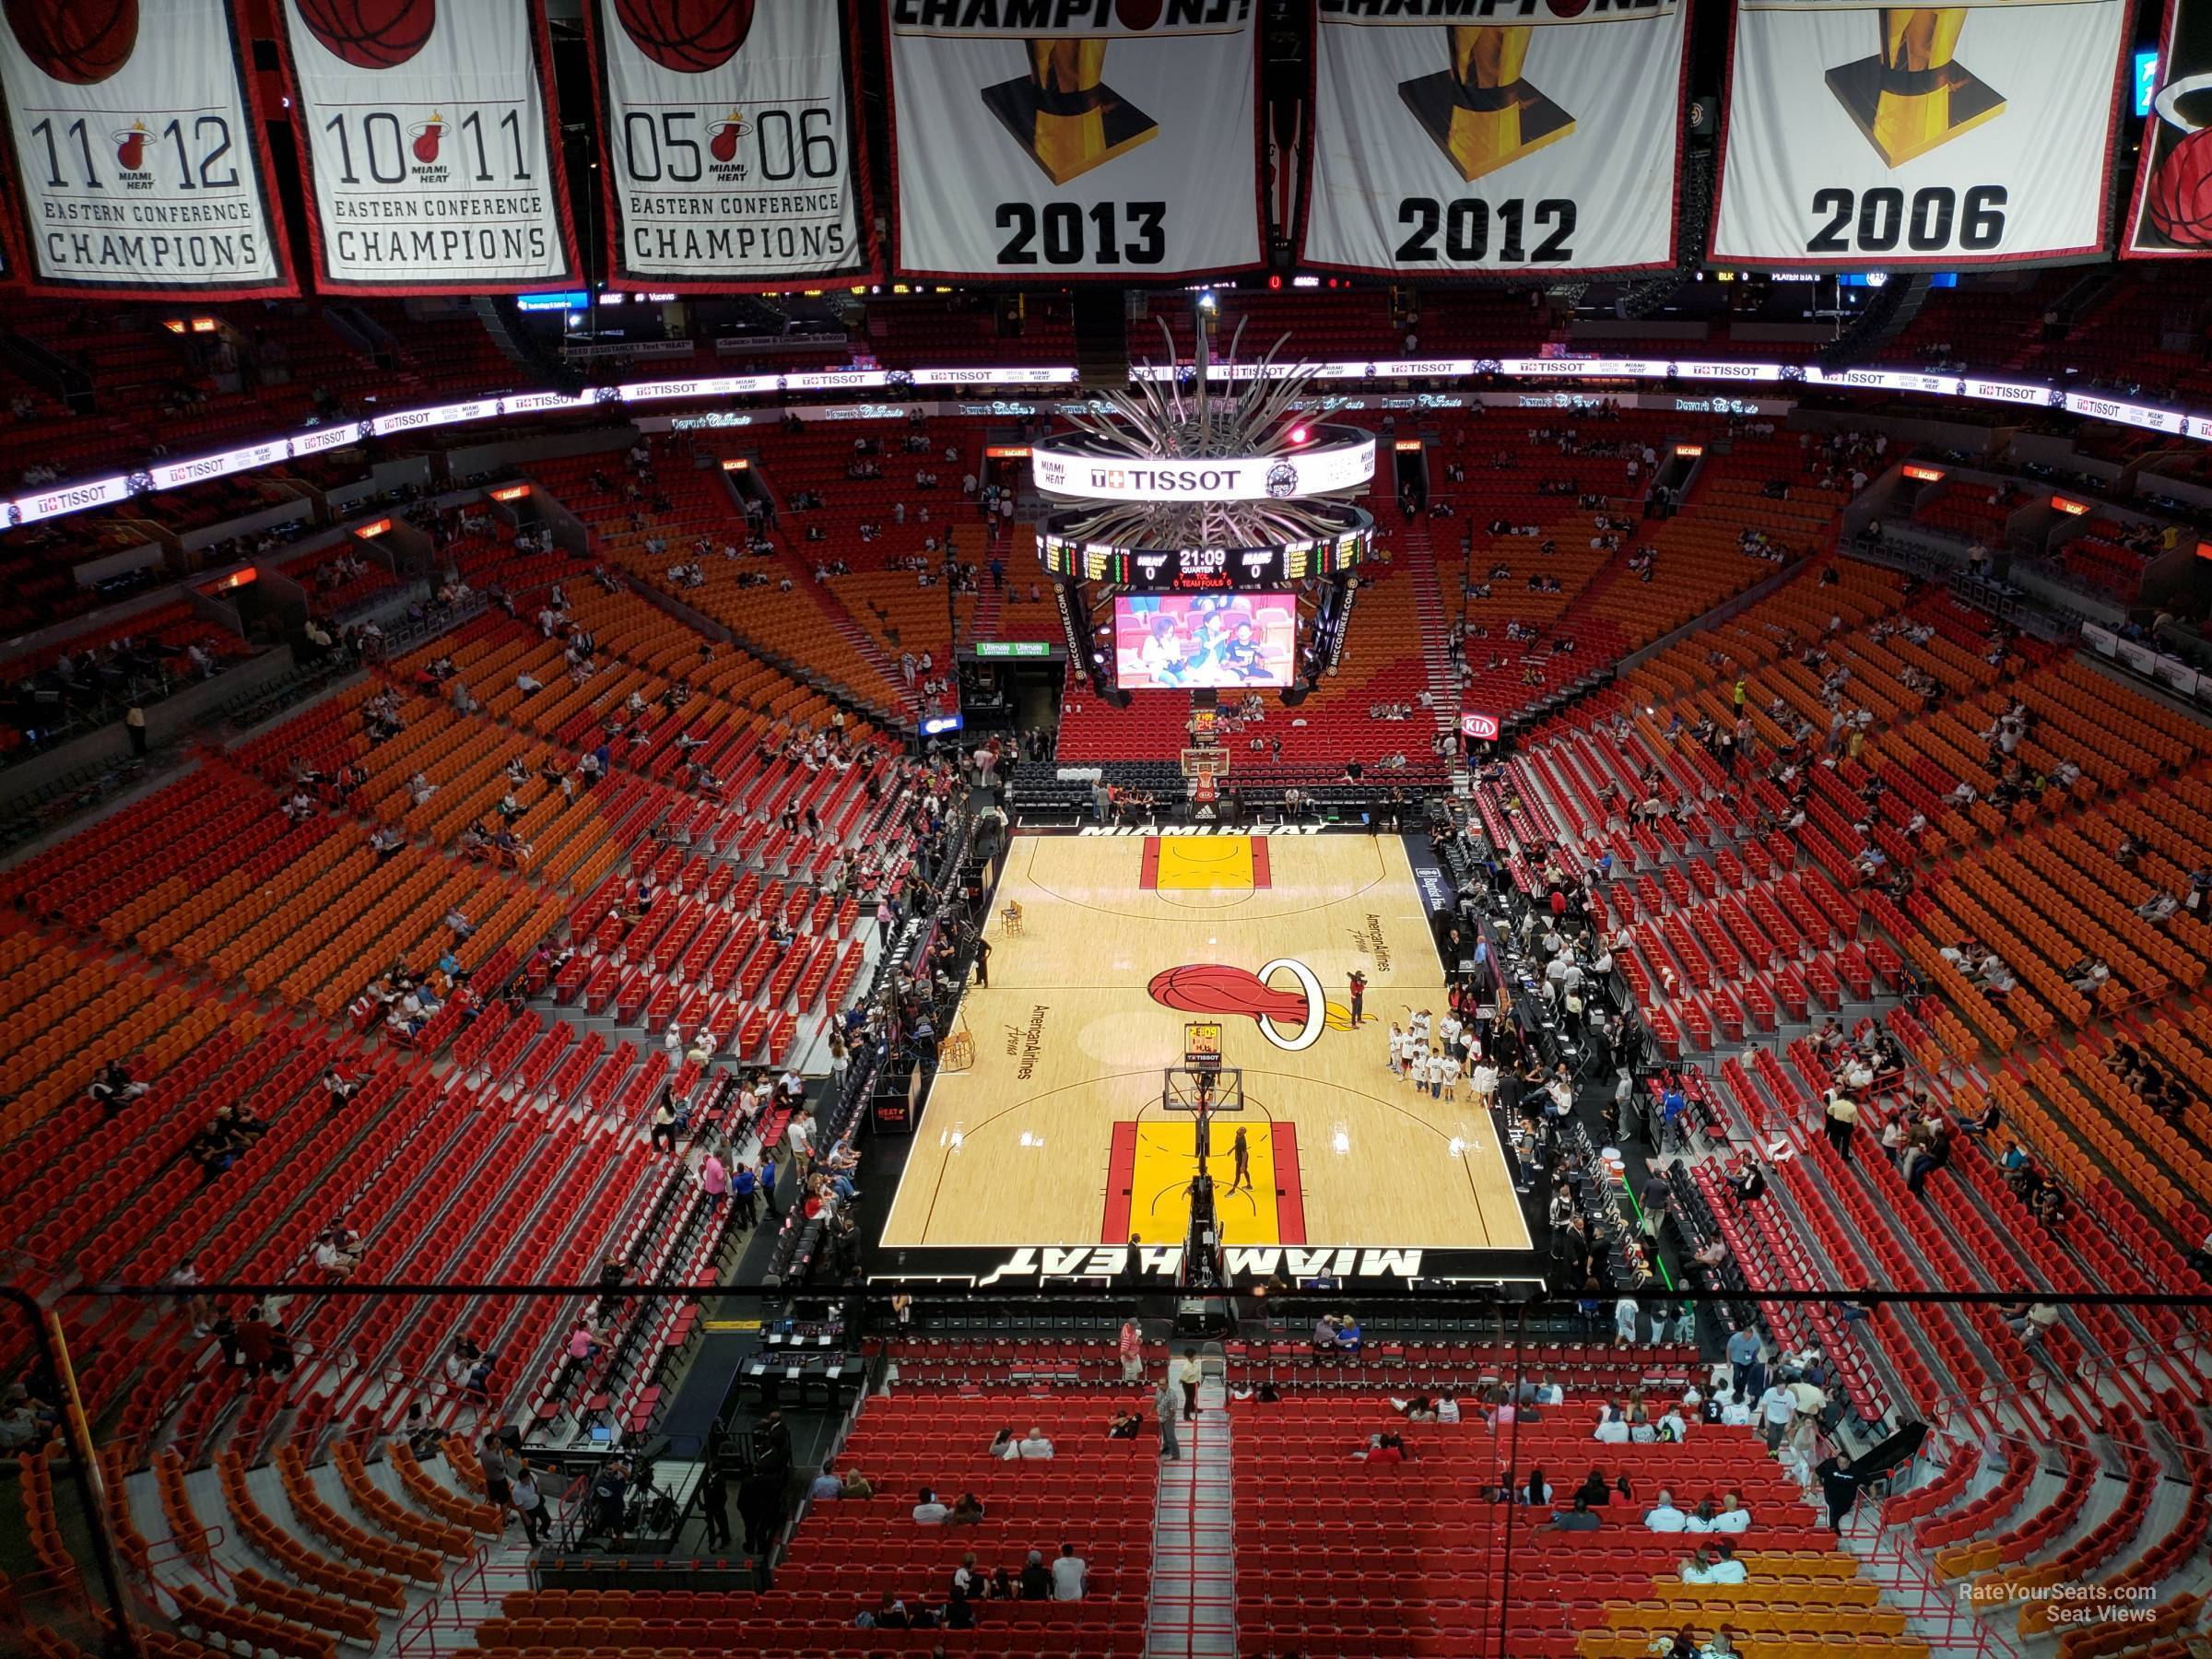 section 415, row 6 seat view  for basketball - miami-dade arena